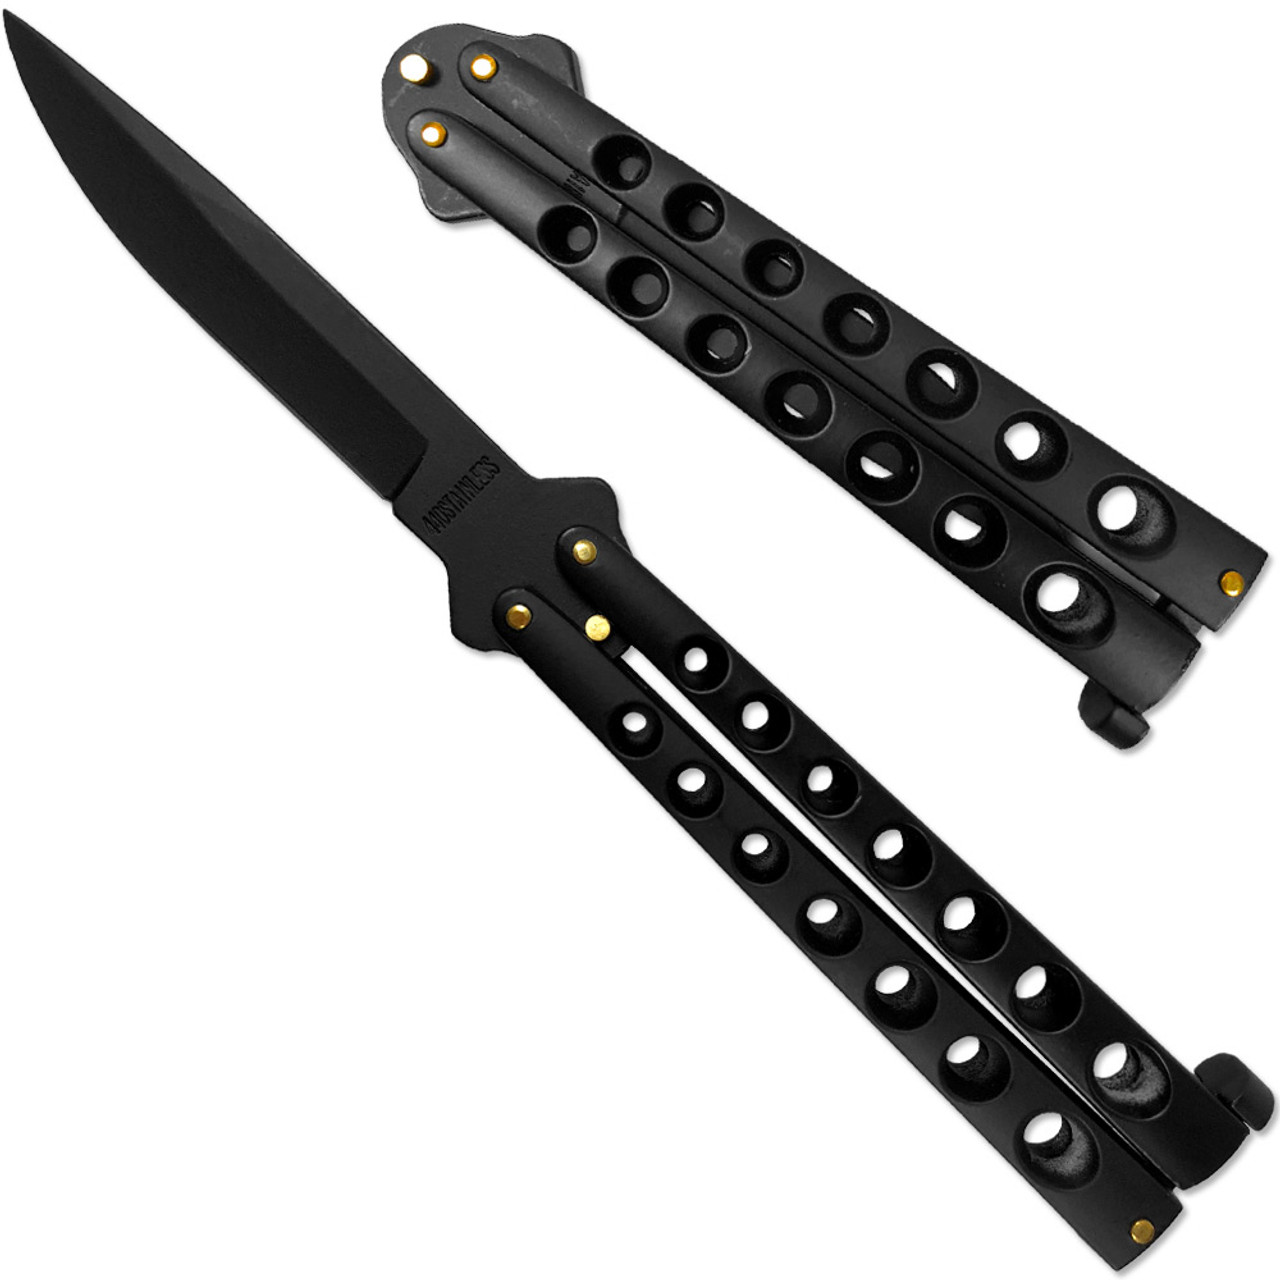 8.75 Fantasy Chain Tactical Balisong Butterfly Knife